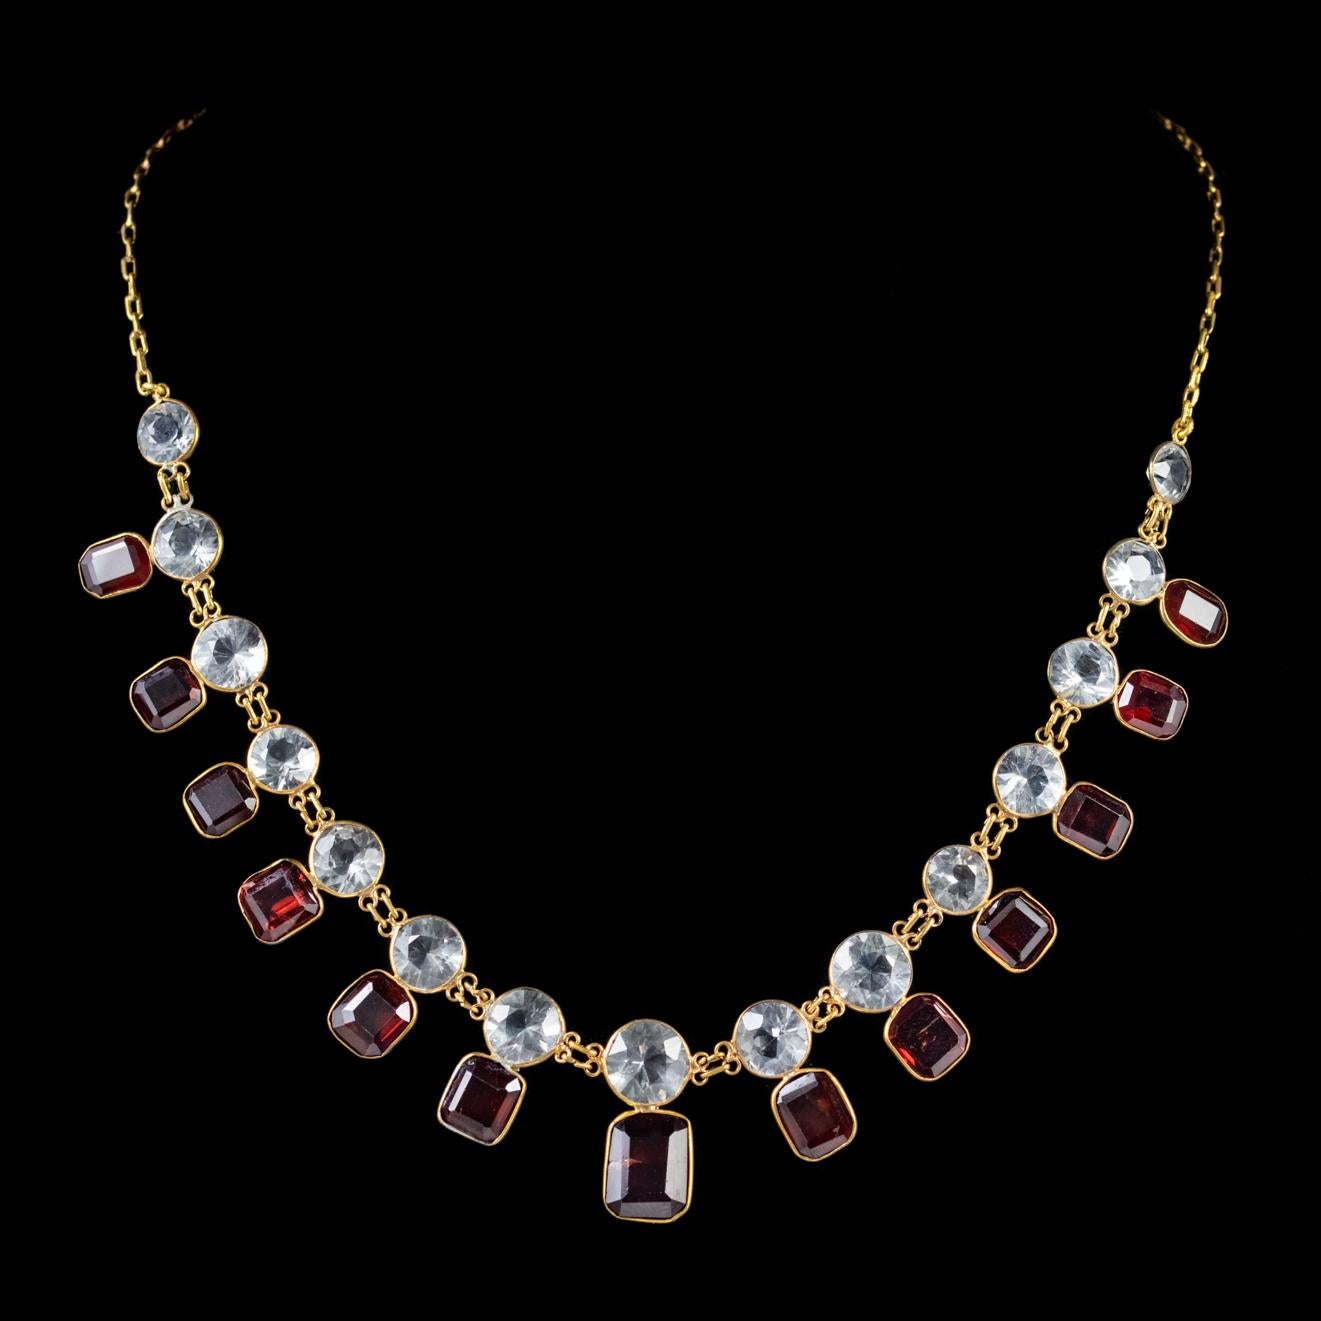 This stunning antique Victorian garland necklace features a line of sparkling white Quartz stones with deep red Garnets displayed underneath. 

The Garnet has been adored throughout history for its blazing red colour which hides beneath its dark